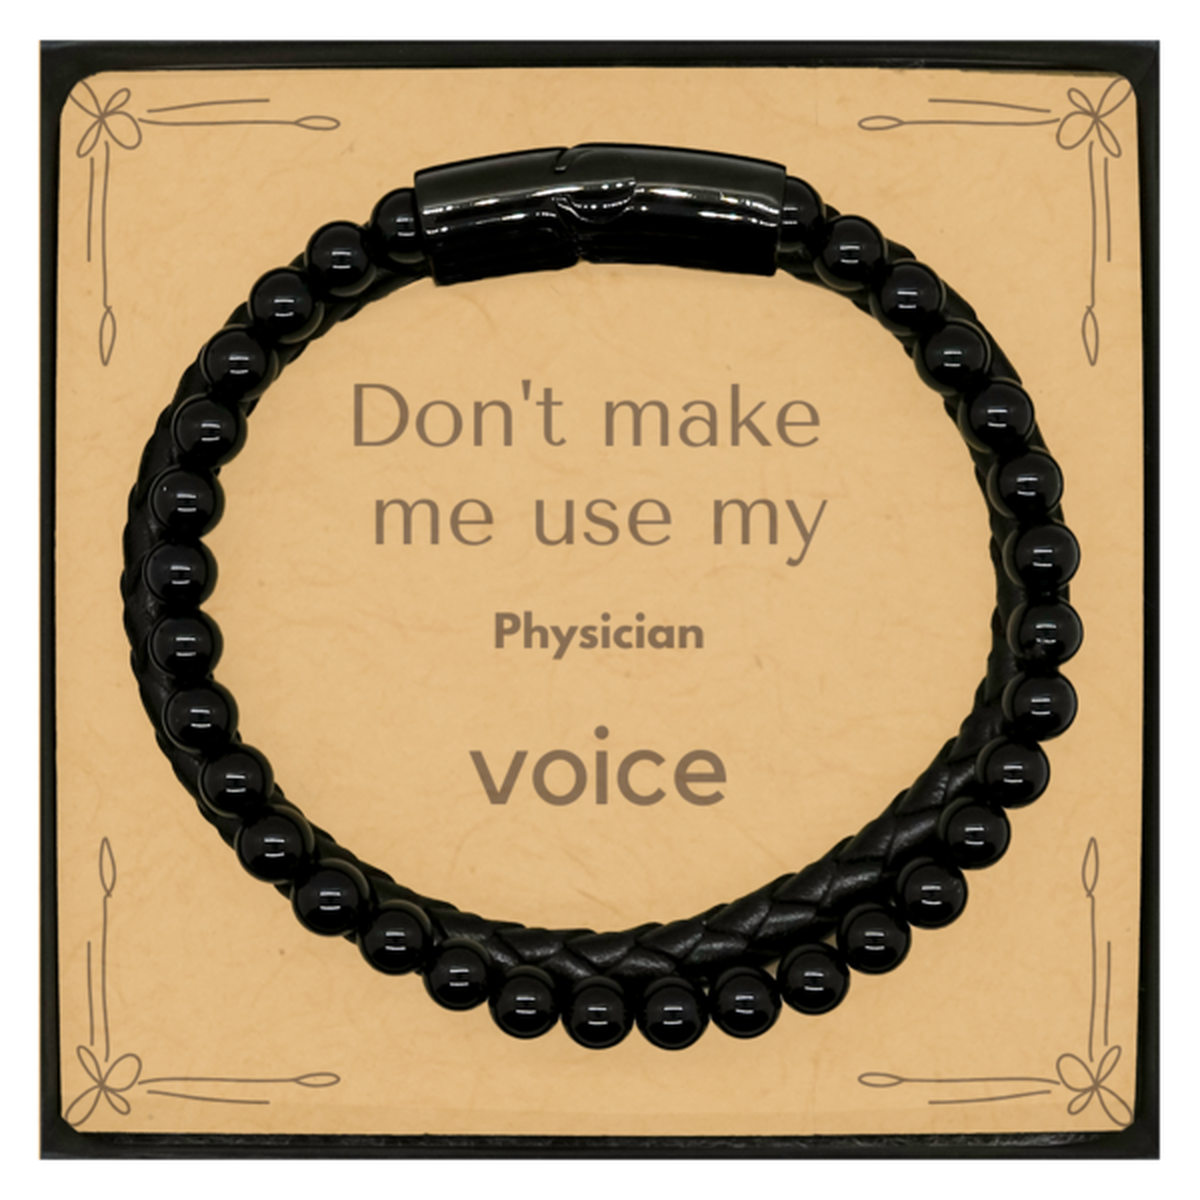 Don't make me use my Physician voice, Sarcasm Physician Card Gifts, Christmas Physician Stone Leather Bracelets Birthday Unique Gifts For Physician Coworkers, Men, Women, Colleague, Friends